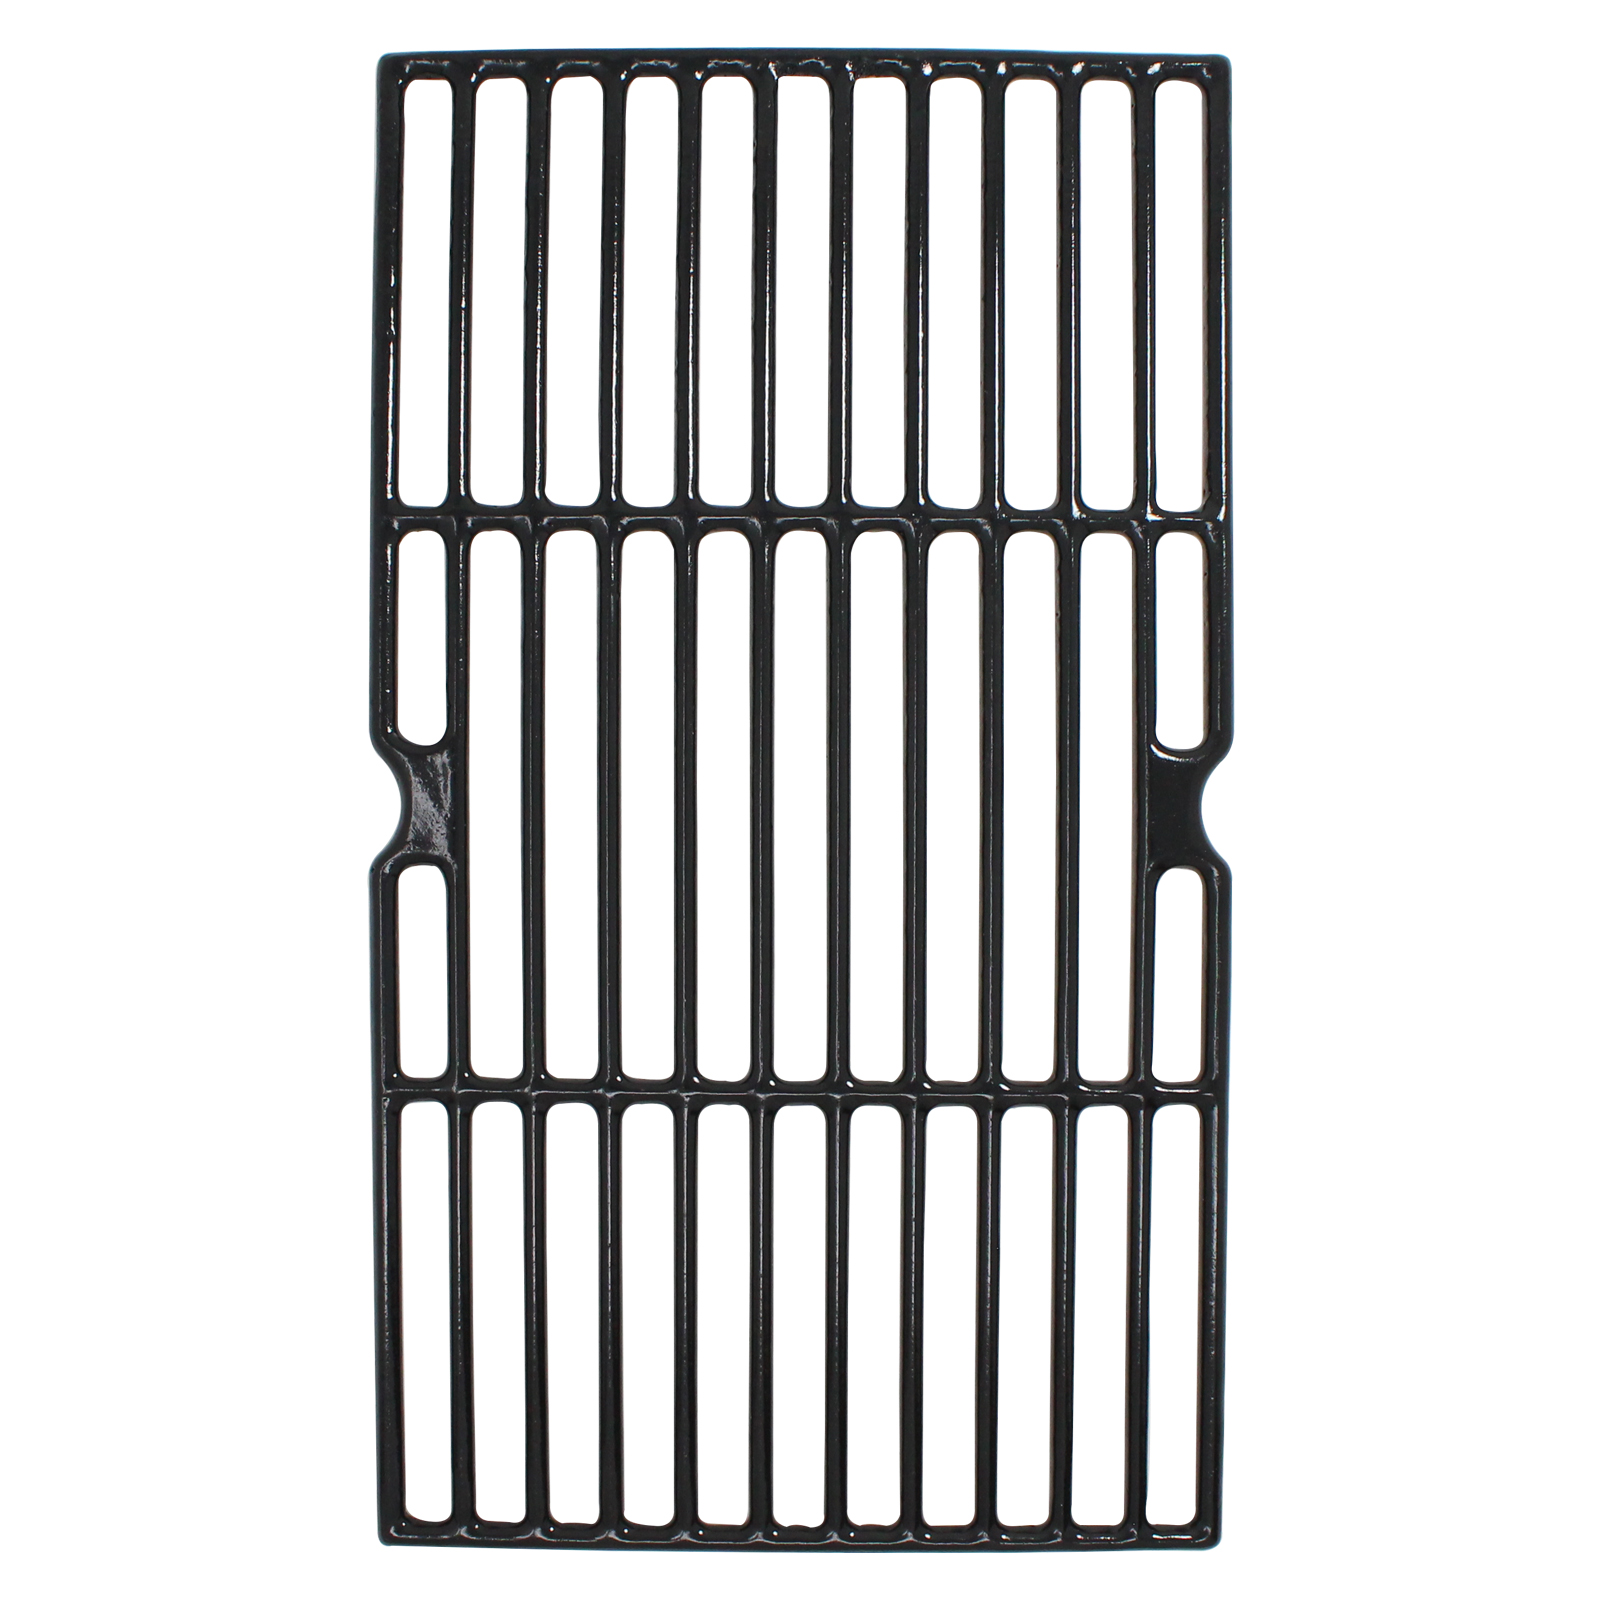 3-Pack BBQ Grill Cooking Grates Replacement Parts for Kenmore 41516117 - Compatible Barbeque Cast Iron Grid 16 3/4" - image 4 of 4